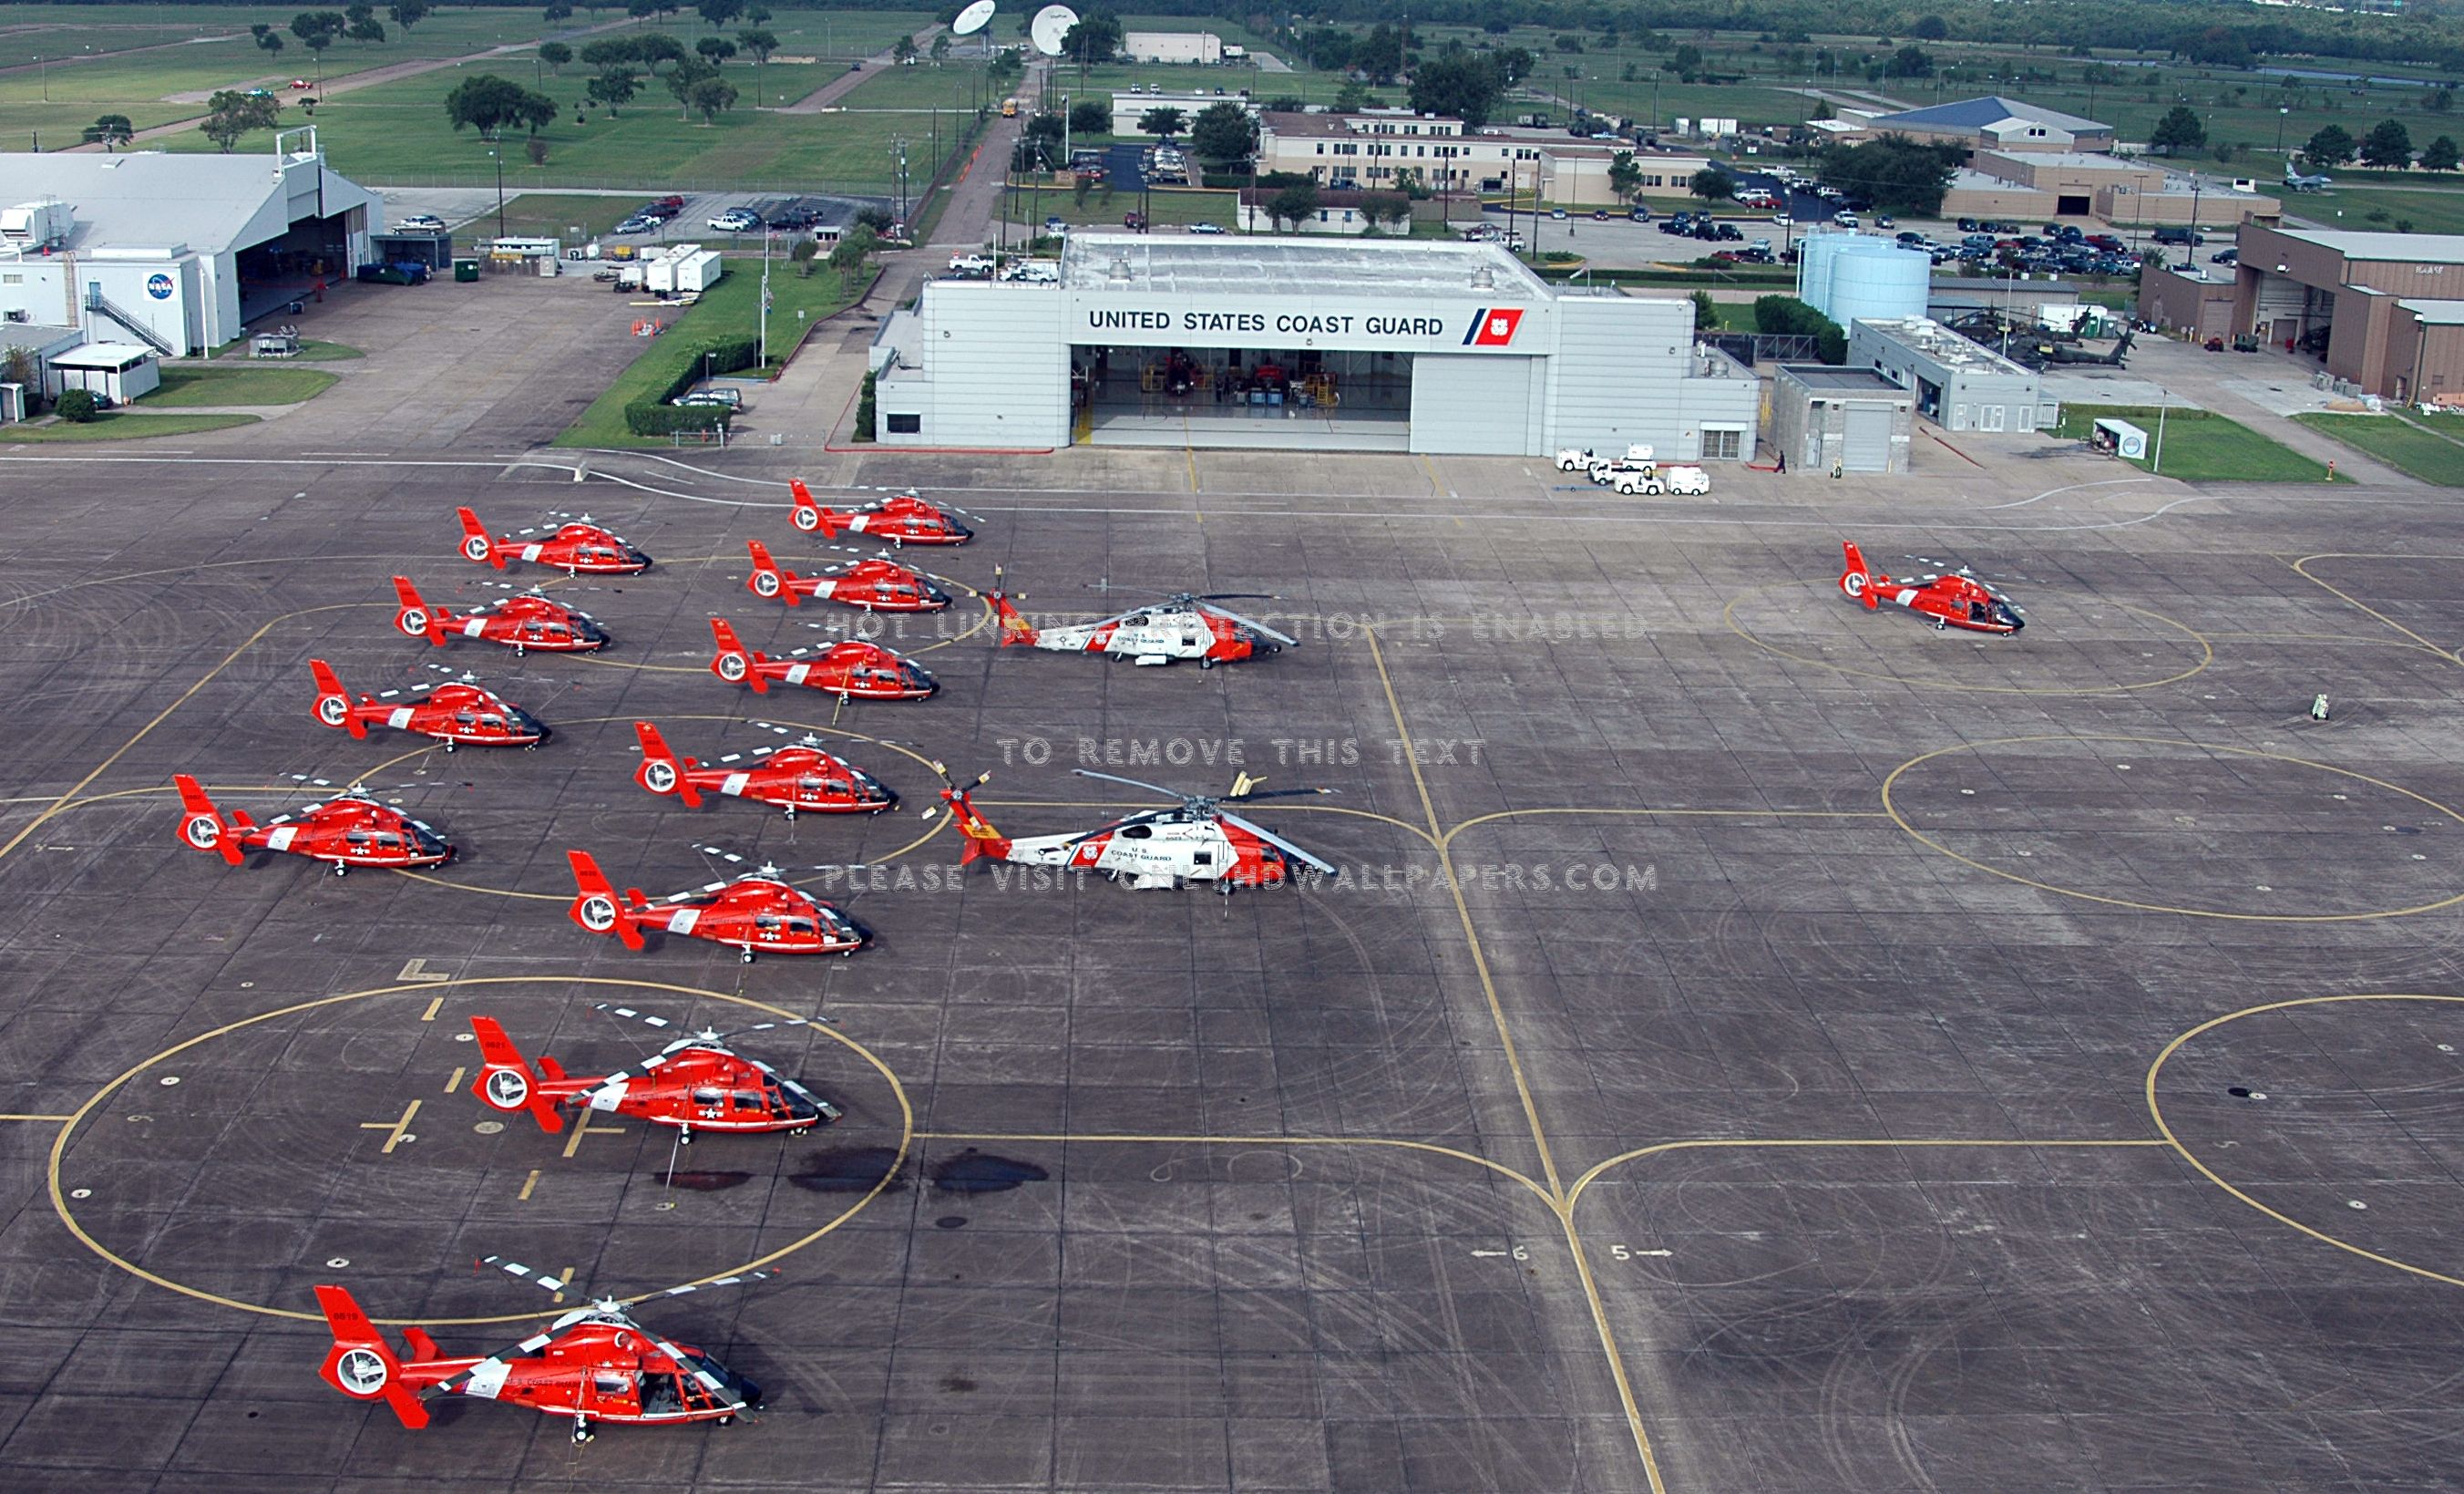 Helicopters coast guard vehicles